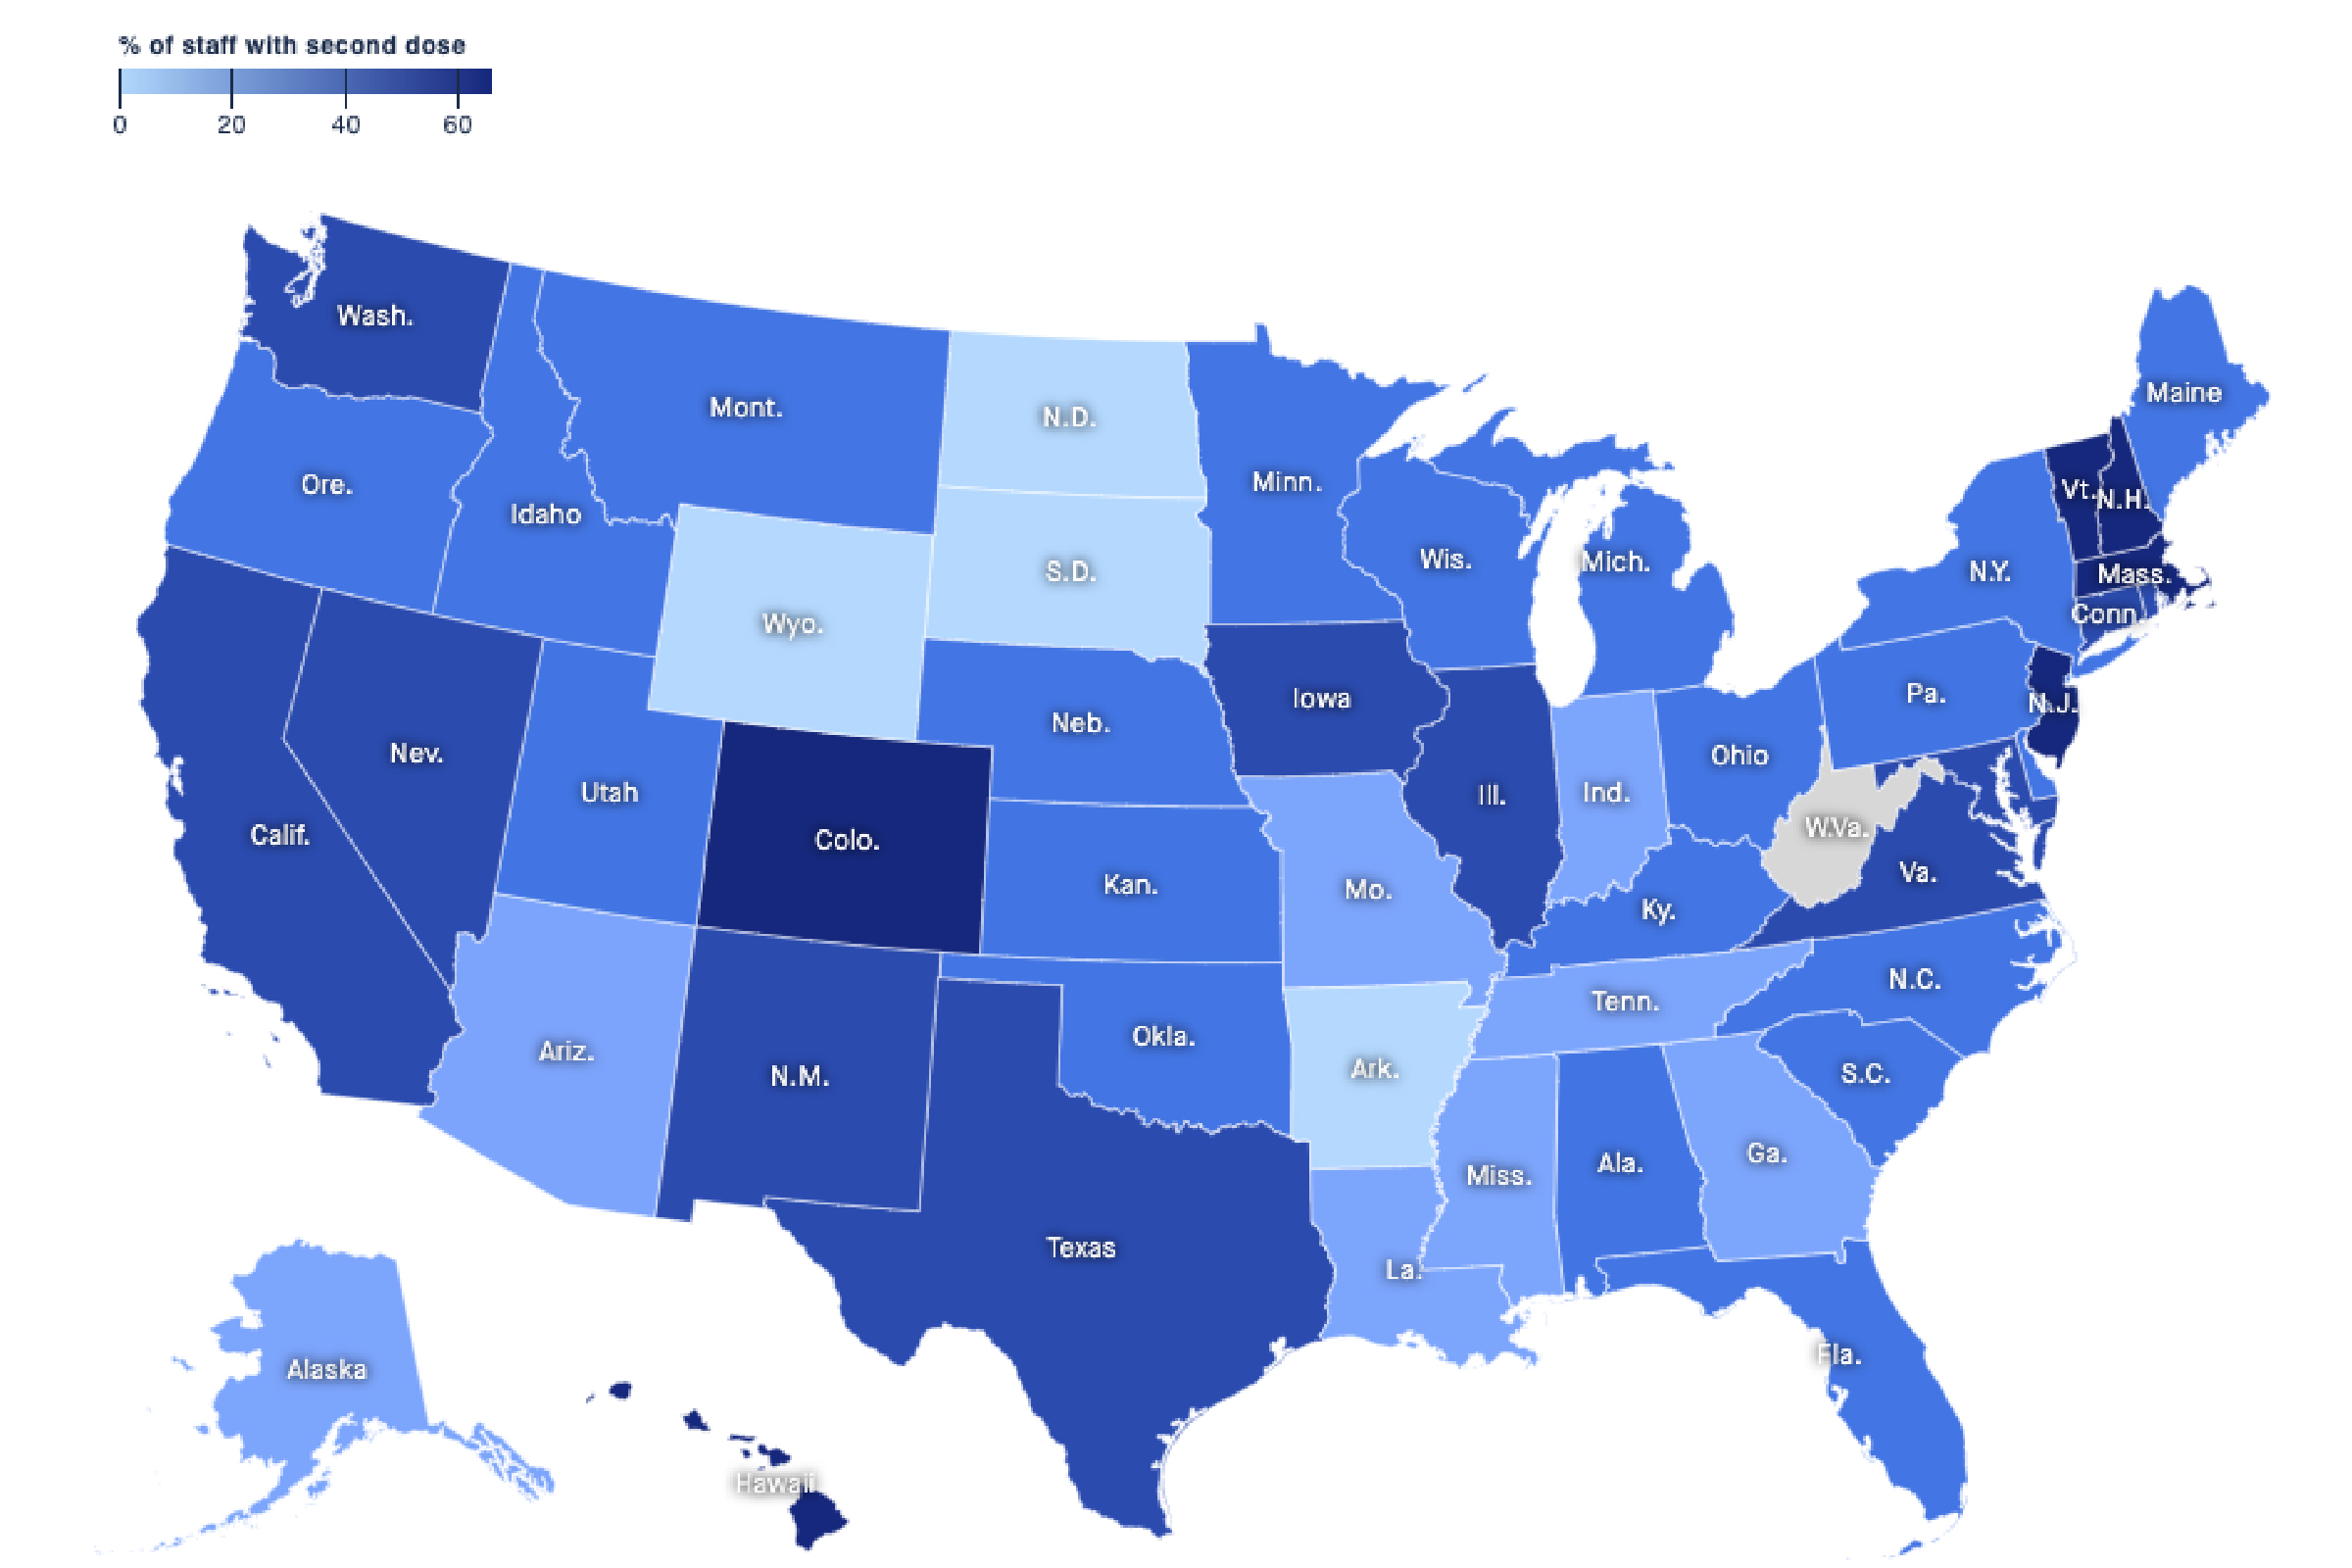 Interactive map showing percentages of long-term care workers who have been fully vaccinated